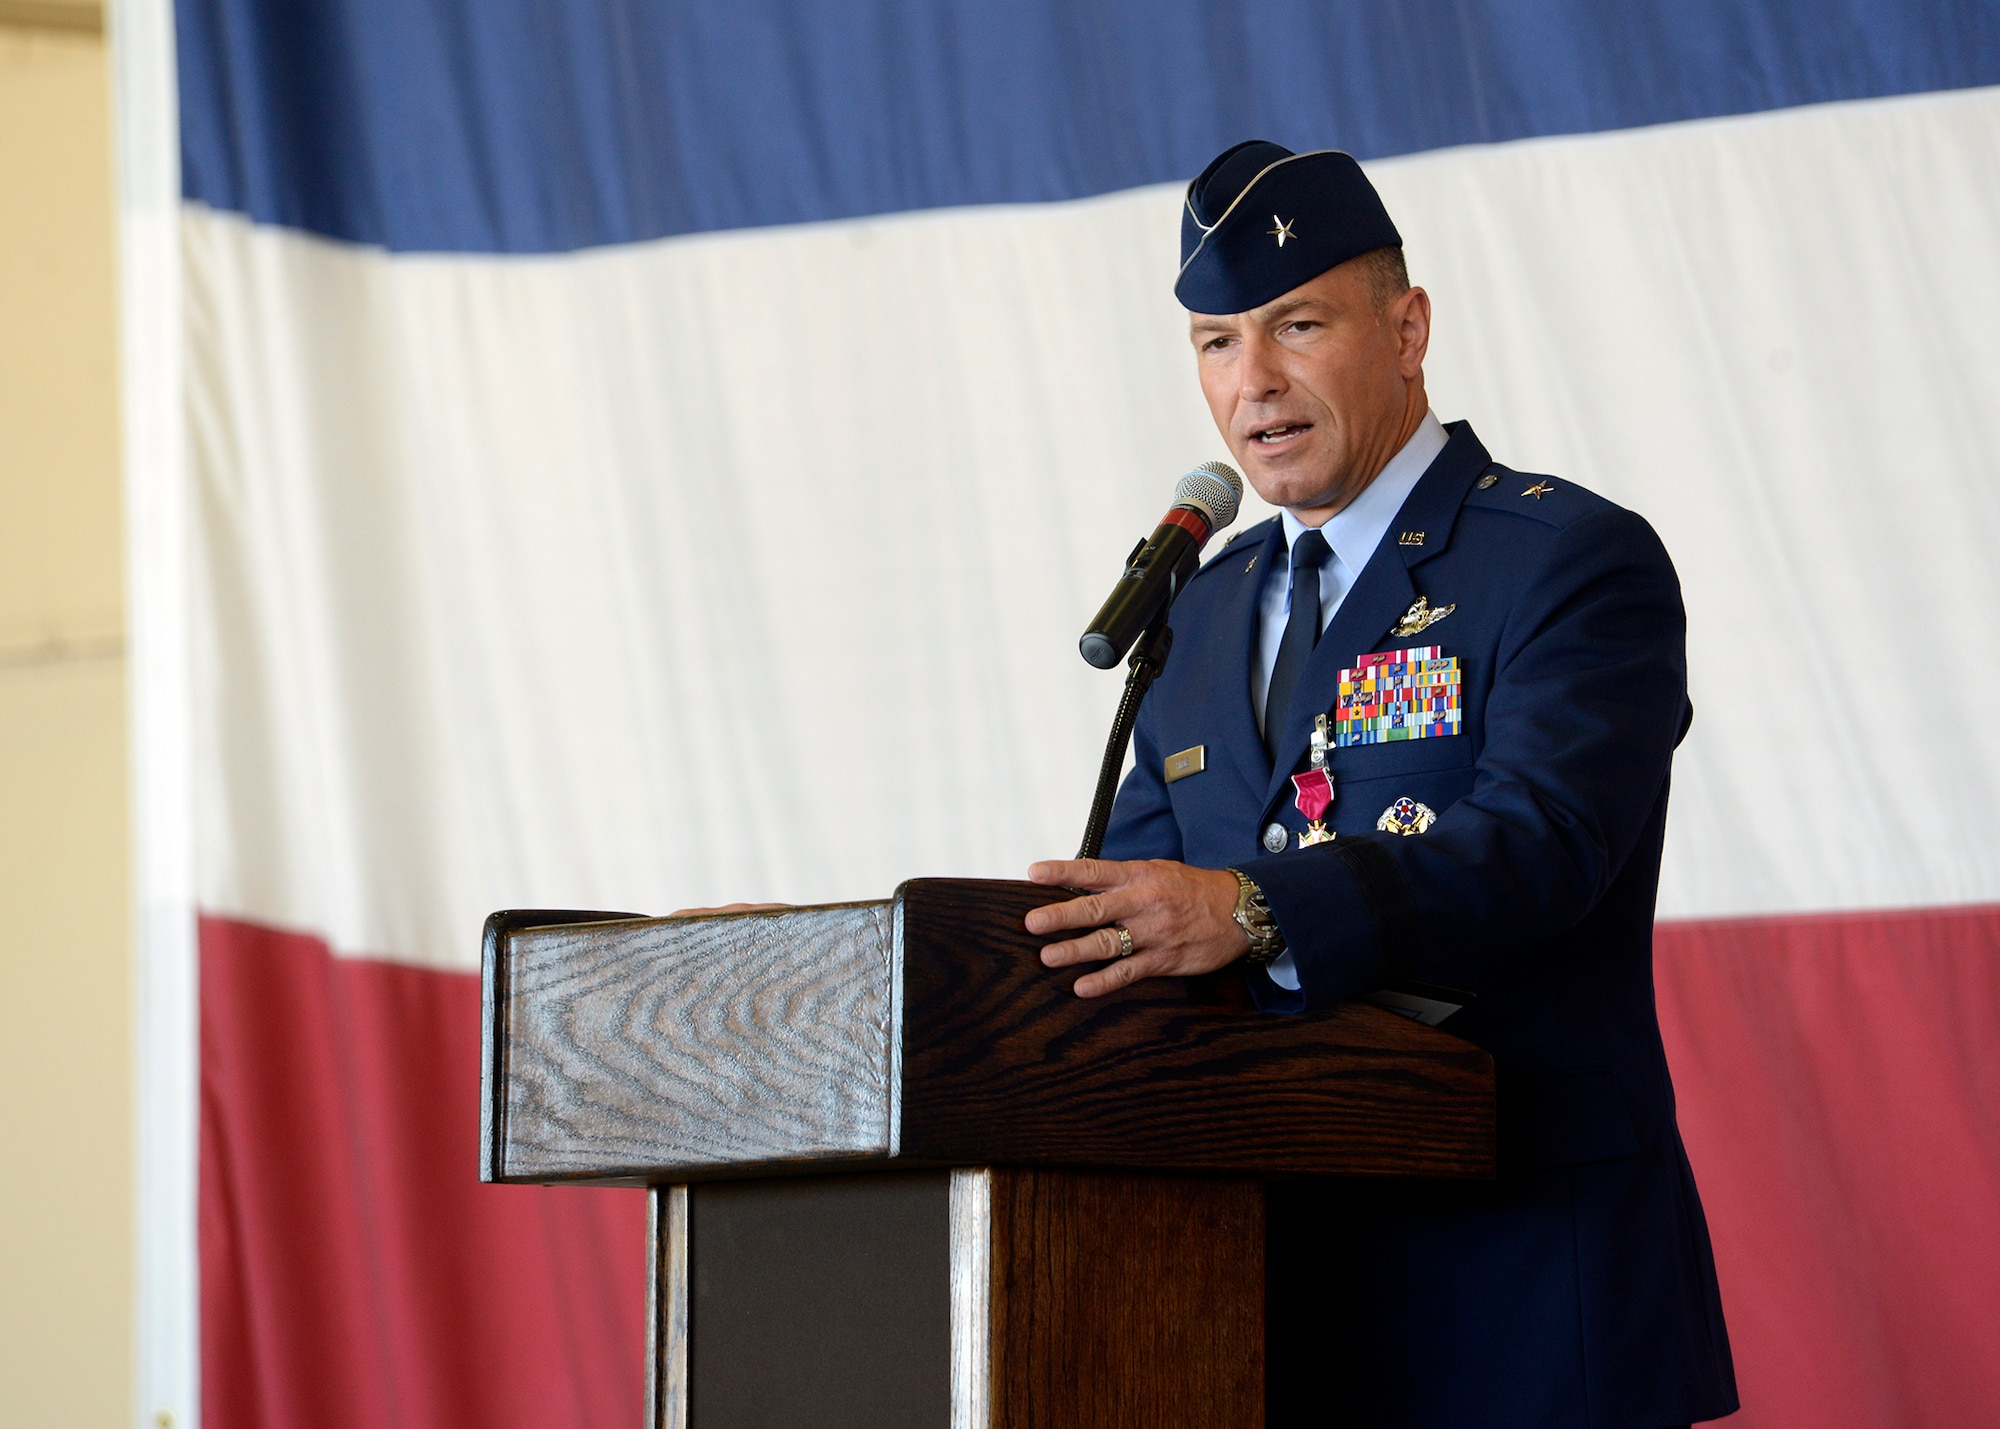 Brig. Gen. Scott Pleus, outgoing 56th Fighter Wing commander, addresses the fighter wing for the last time as their commander during the 56th Fighter Wing Change of Command ceremony July 13, 2016 at Luke Air Force Base, Ariz.  (U.S. Air Force photo by Senior Airman Devante Williams)